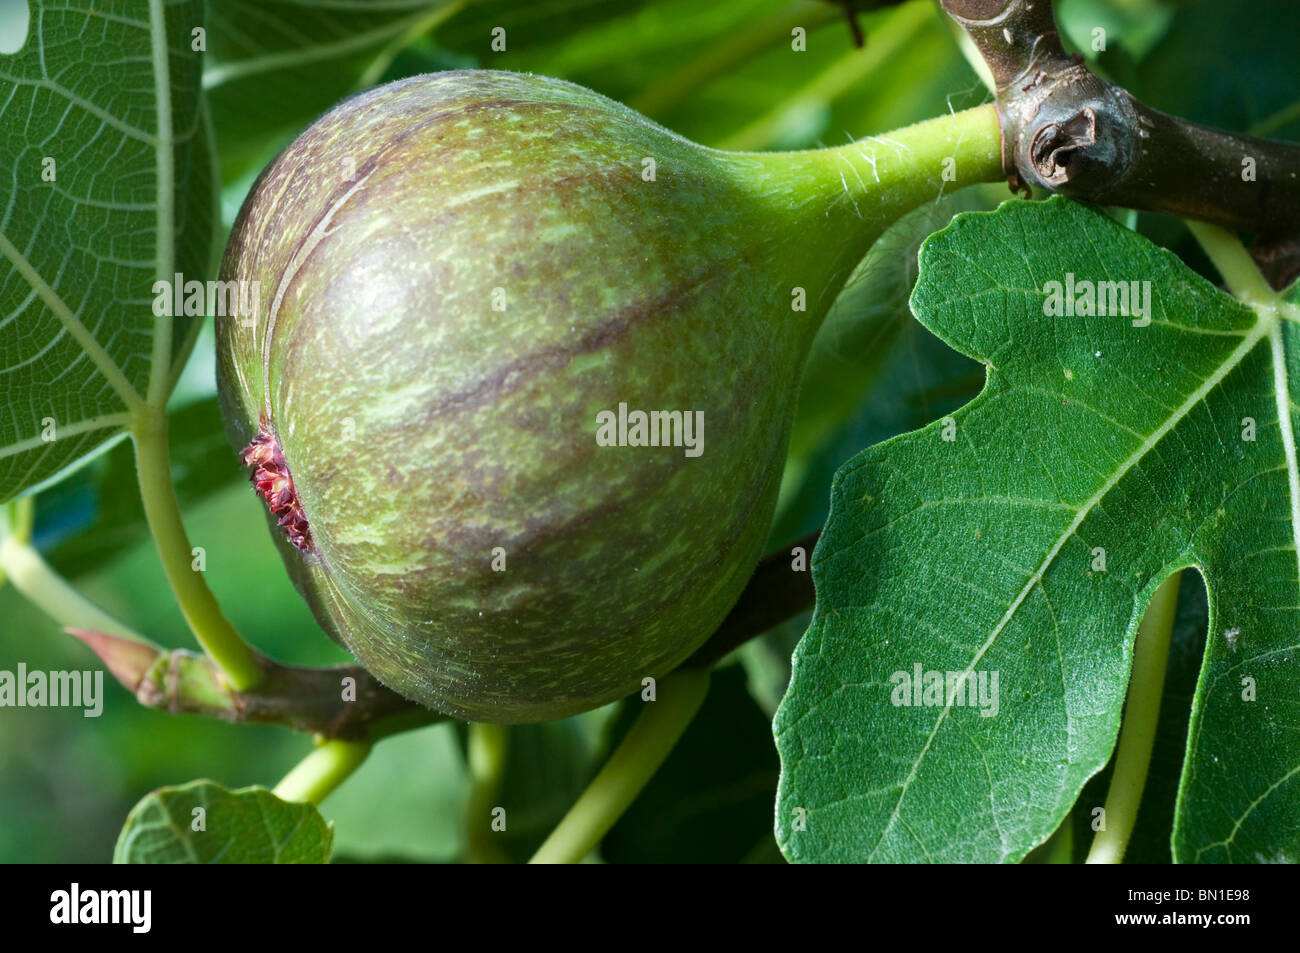 A ripening fig on tree Stock Photo